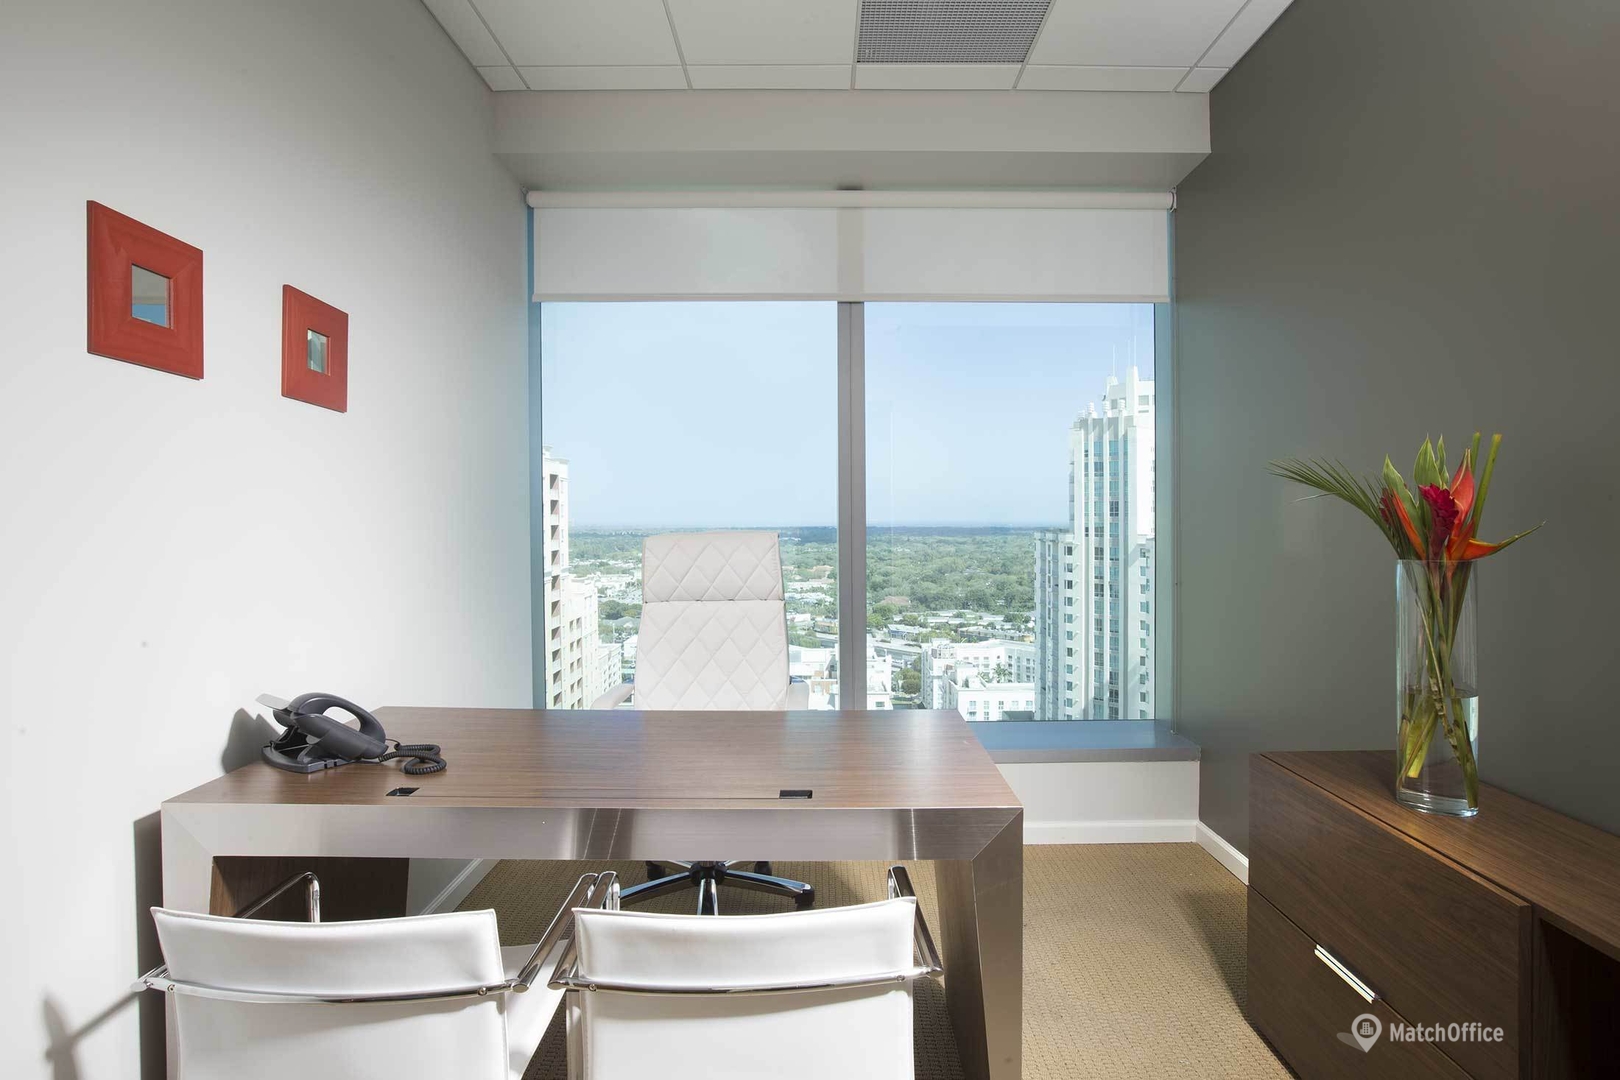 8950 SW 74 Court The Best Bussines Suites for Lease in Miami FL